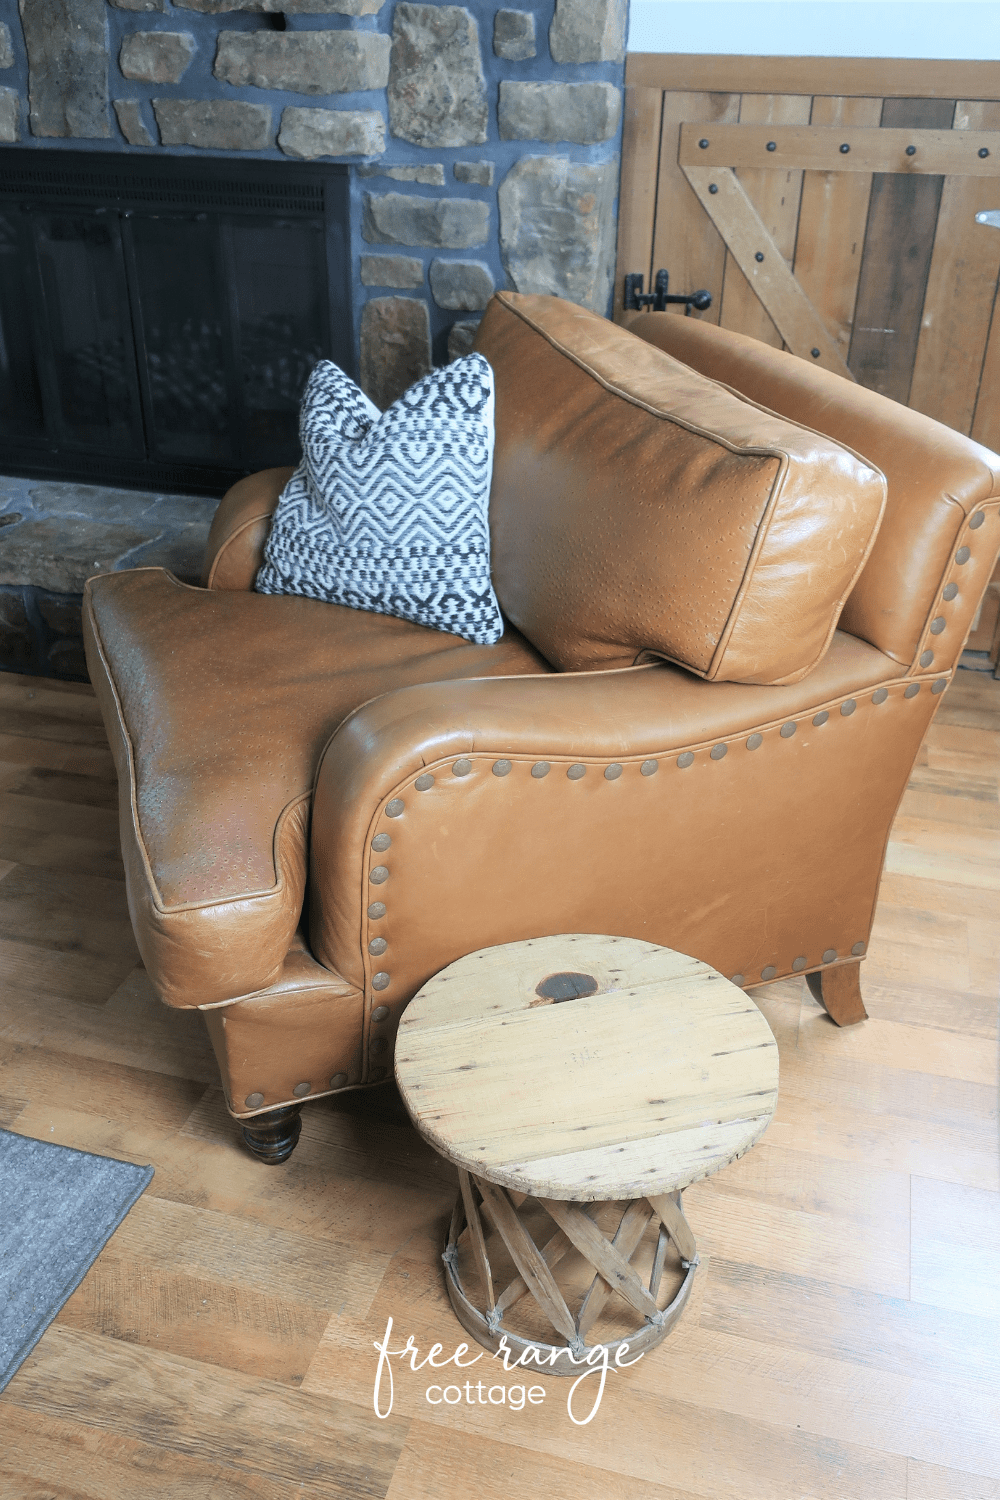 Leather chair in farmhouse style living room